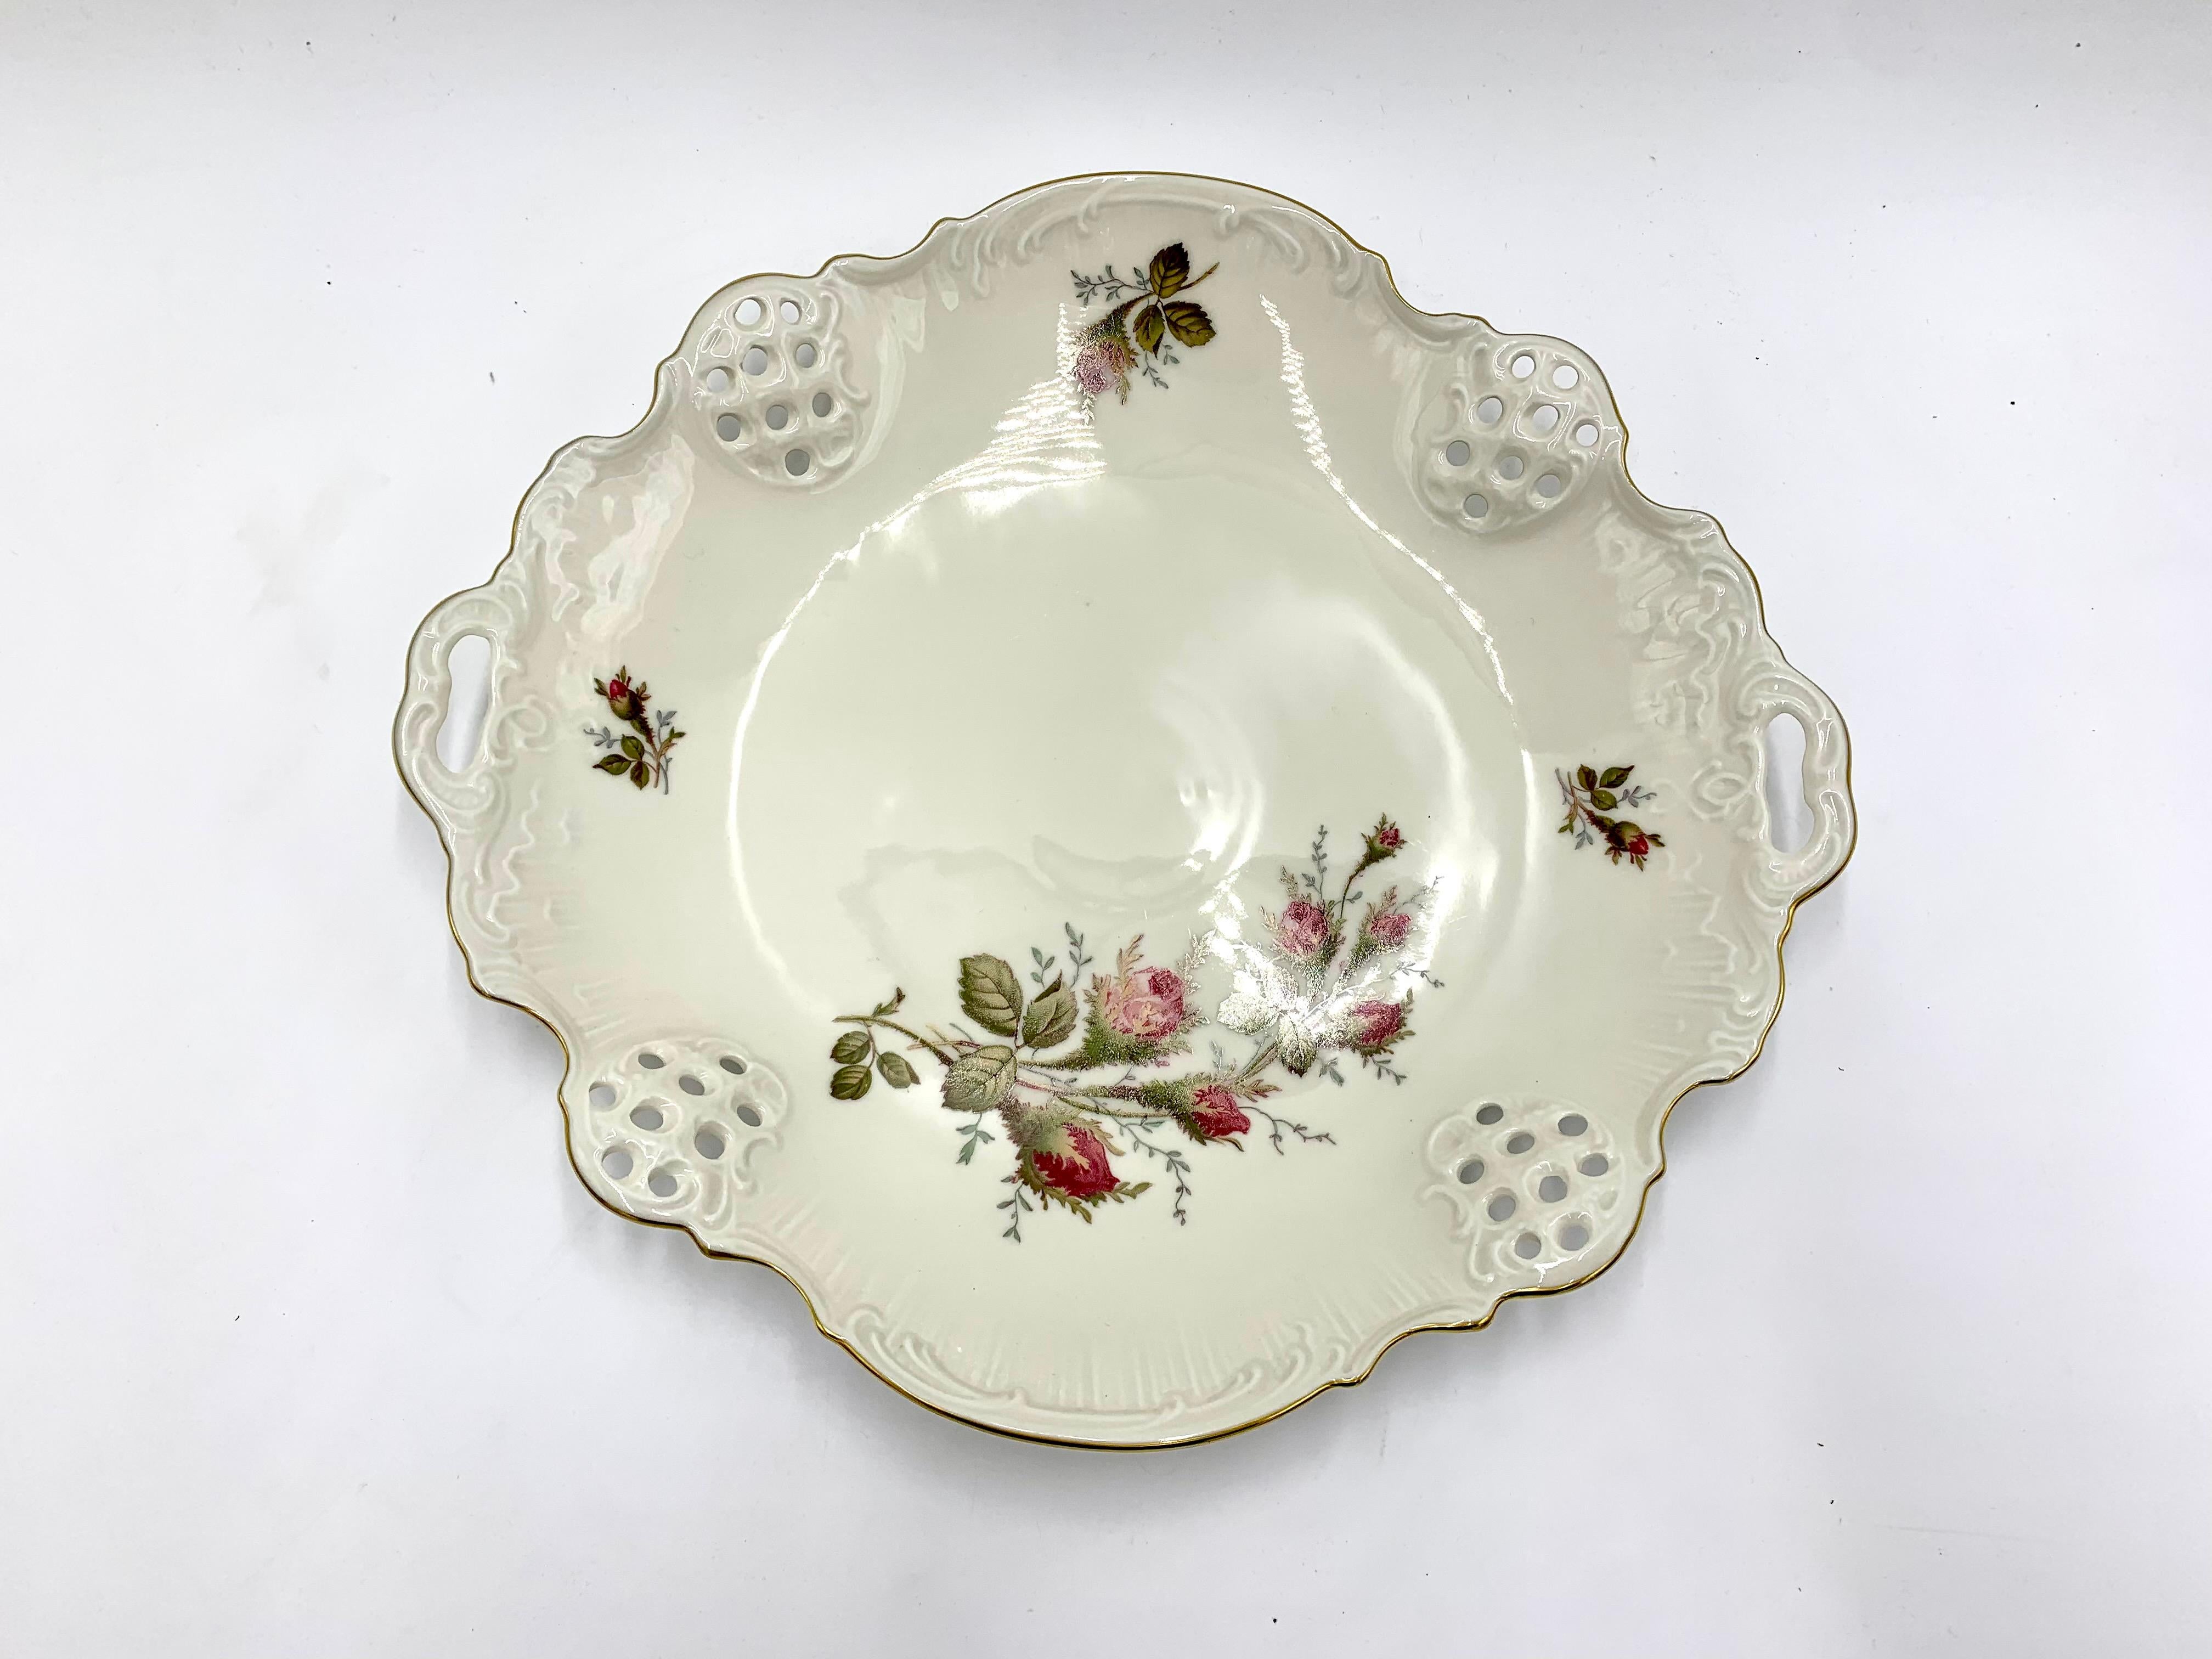 Porcelain platter with openwork decorations and a rose motif.

Signed Rosenthal Classic Rose.

Made in Germany in the 70s of the last century.

Very good condition, no damage.

Measures: Height 4cm / width 30.5 cm / depth 28cm.